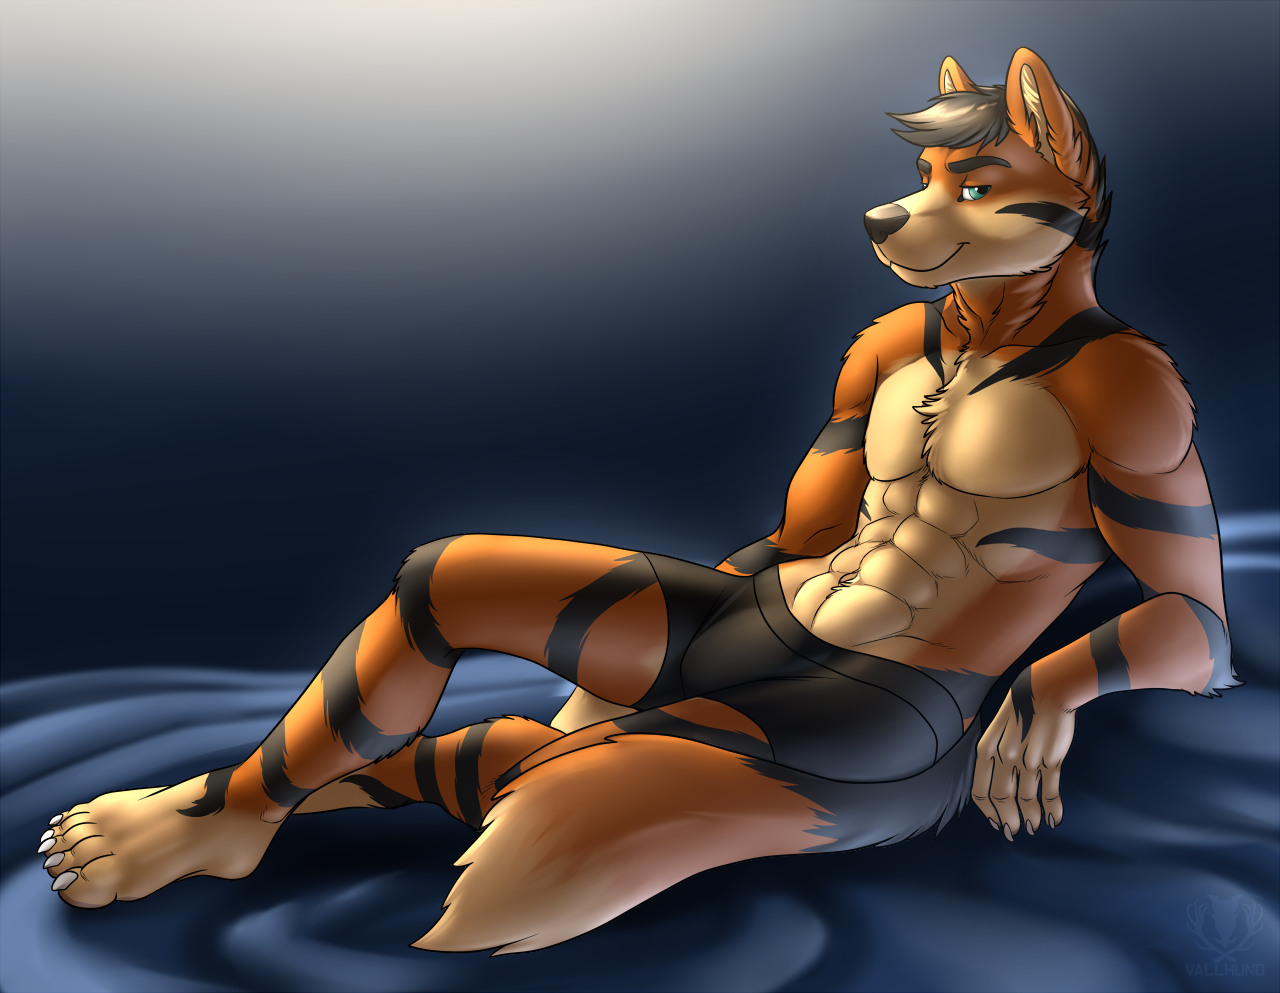 How are my undies! By Valhund by Mal-kin -- Fur Affinity [dot] net